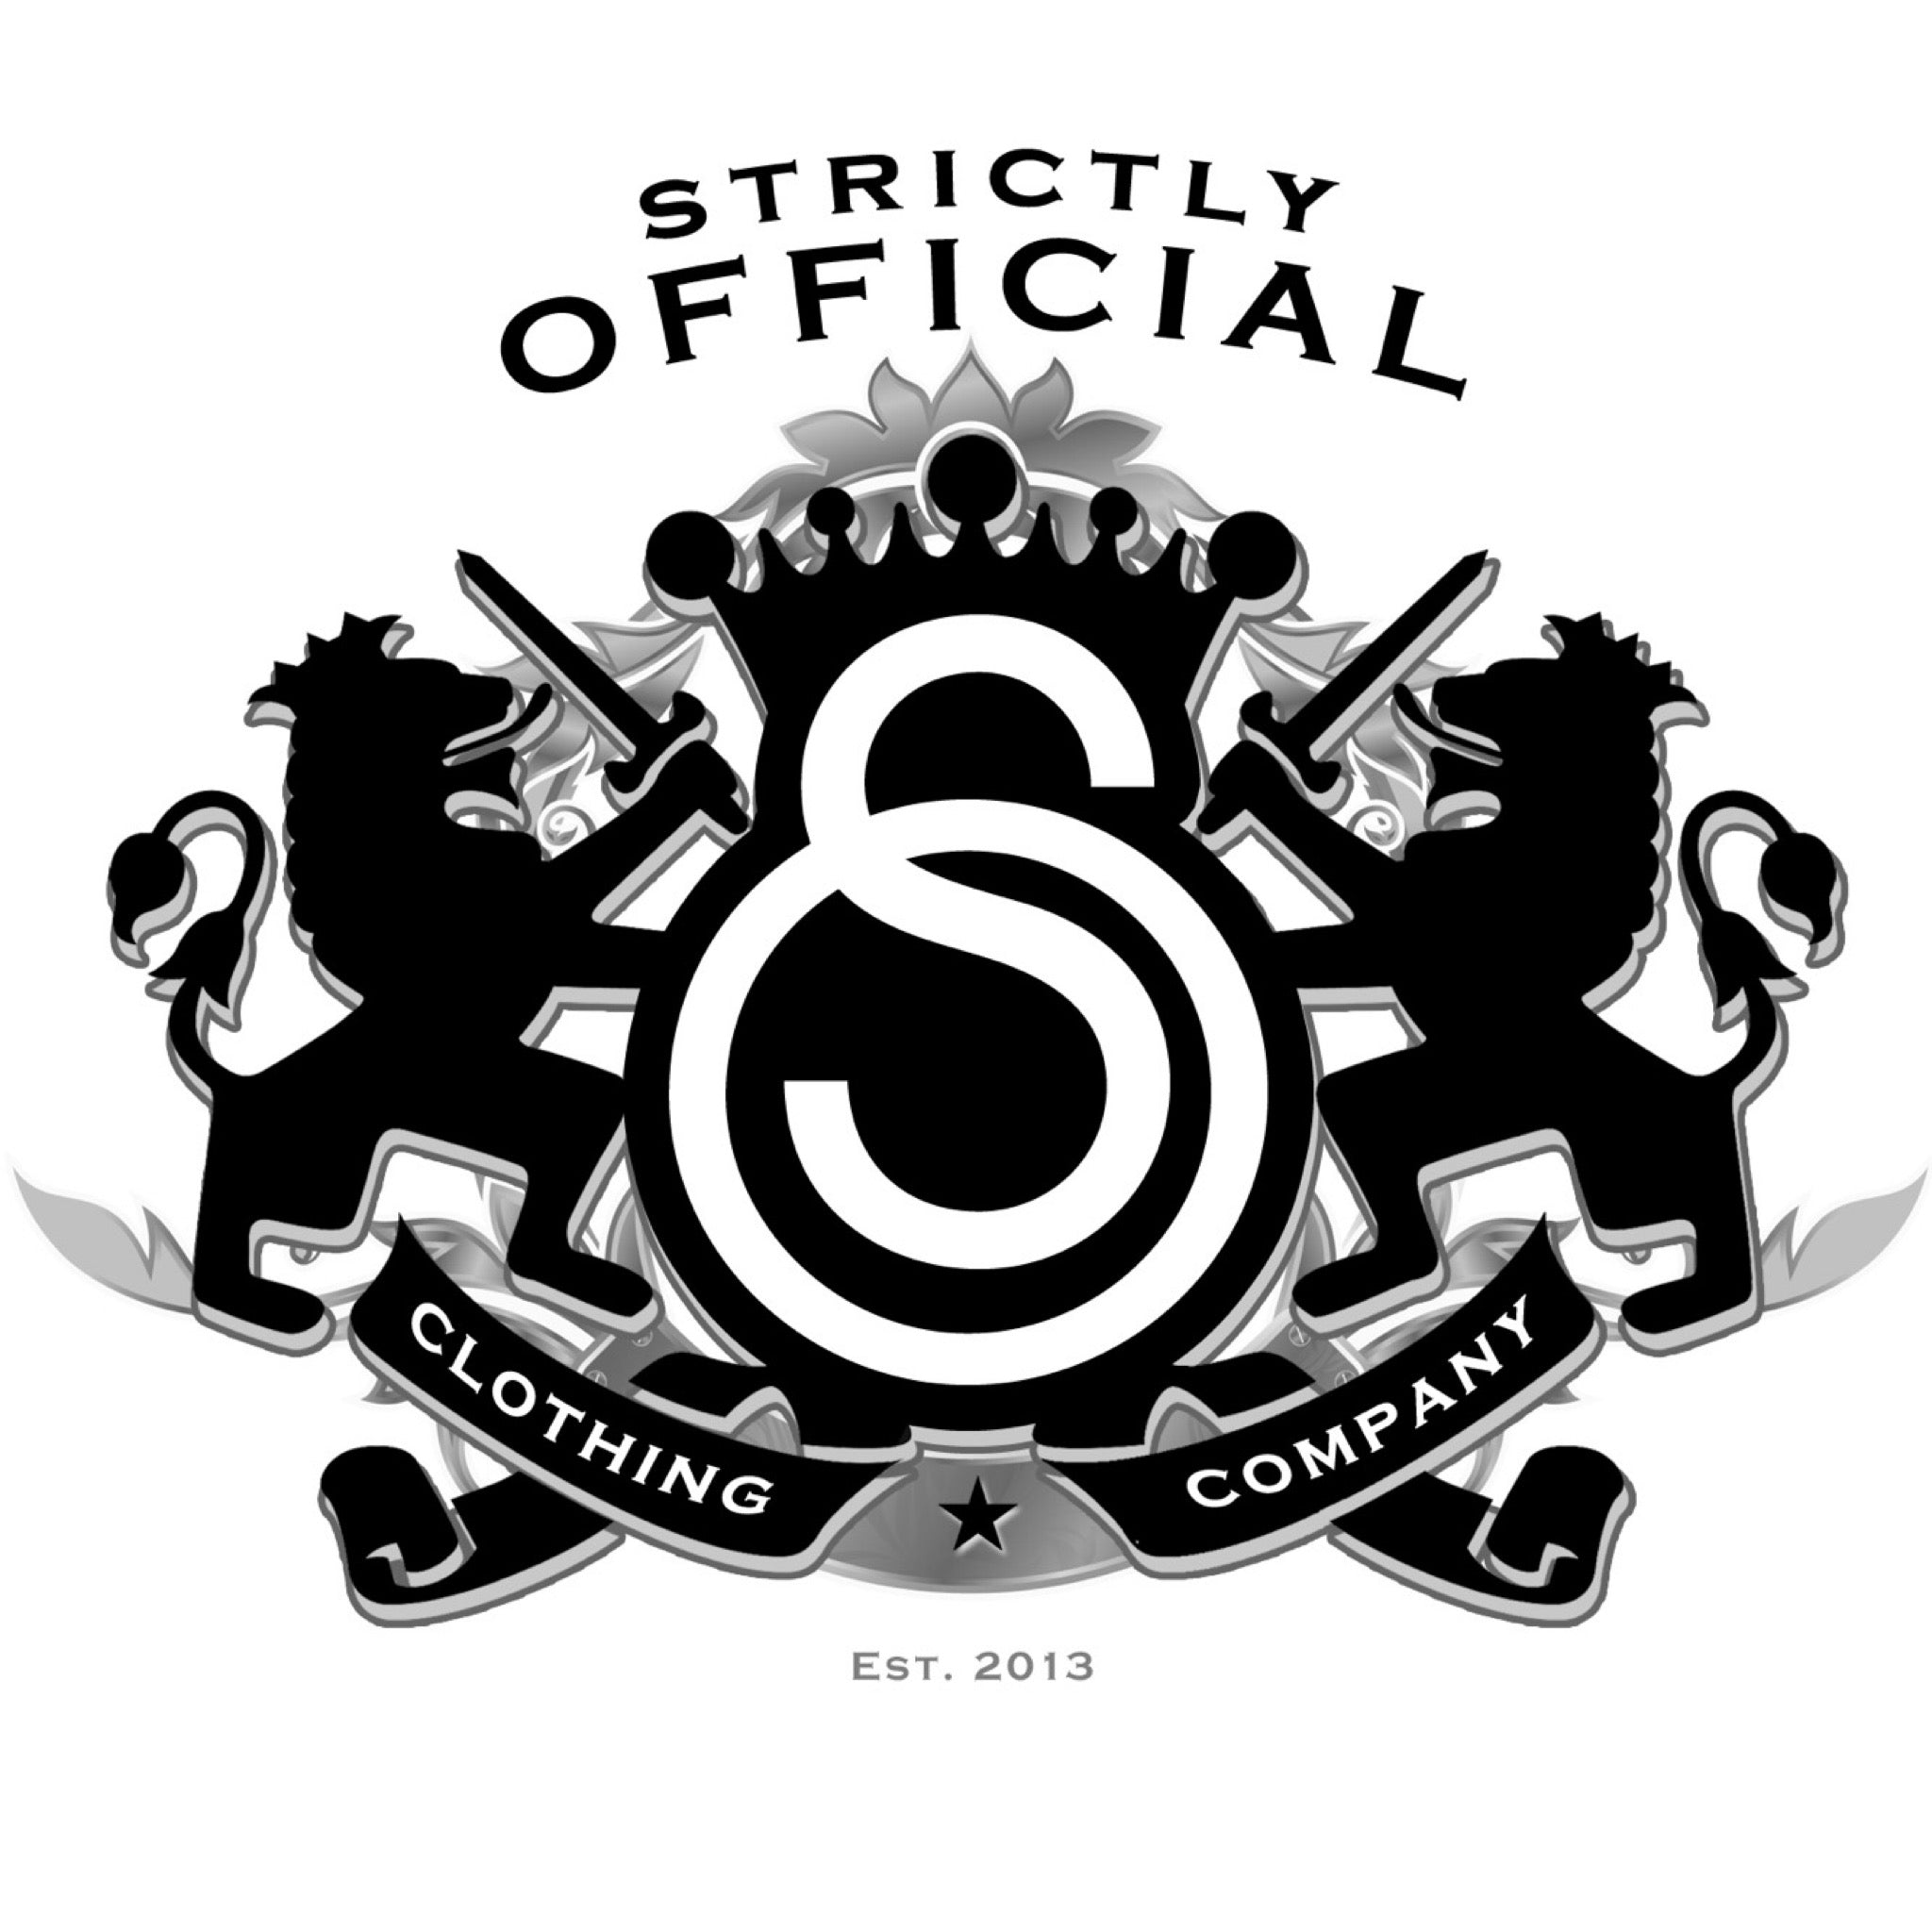 Strictly Official Clothing Co